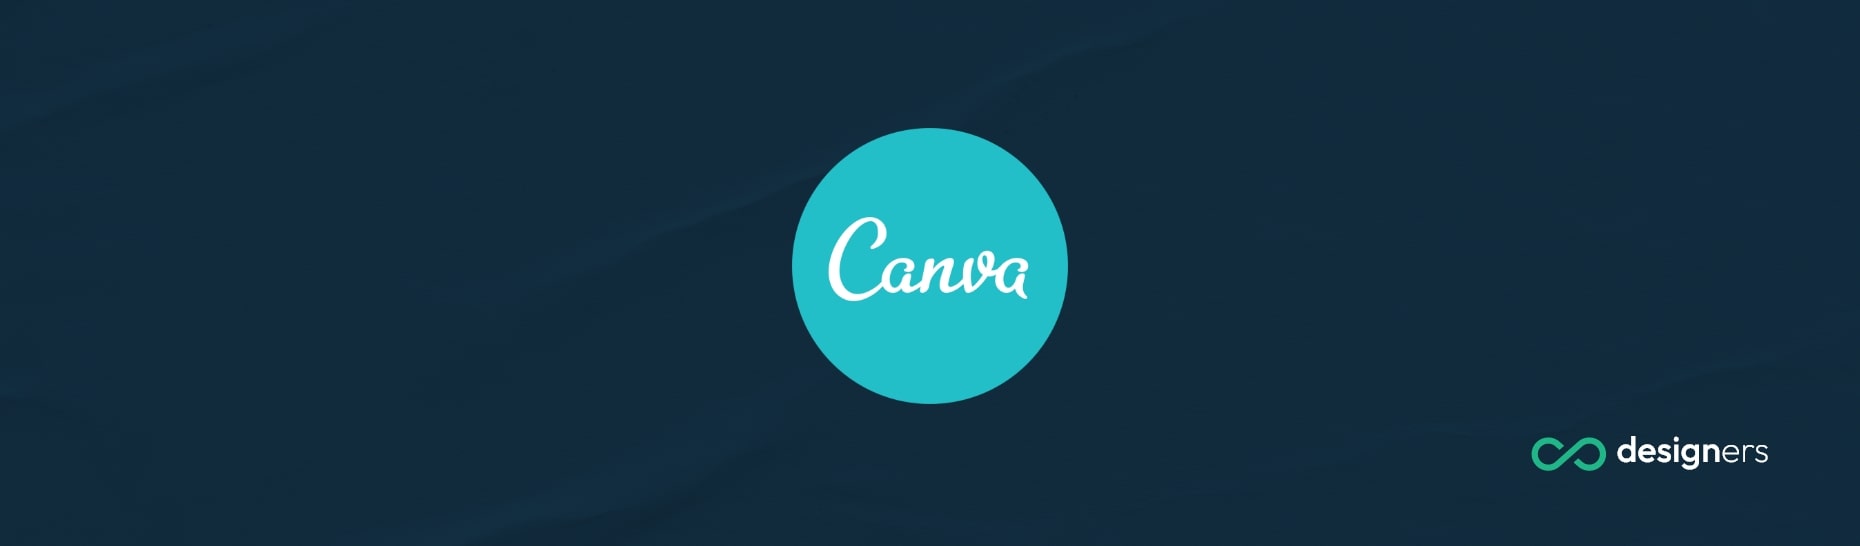 Is Visme the Same as Canva?